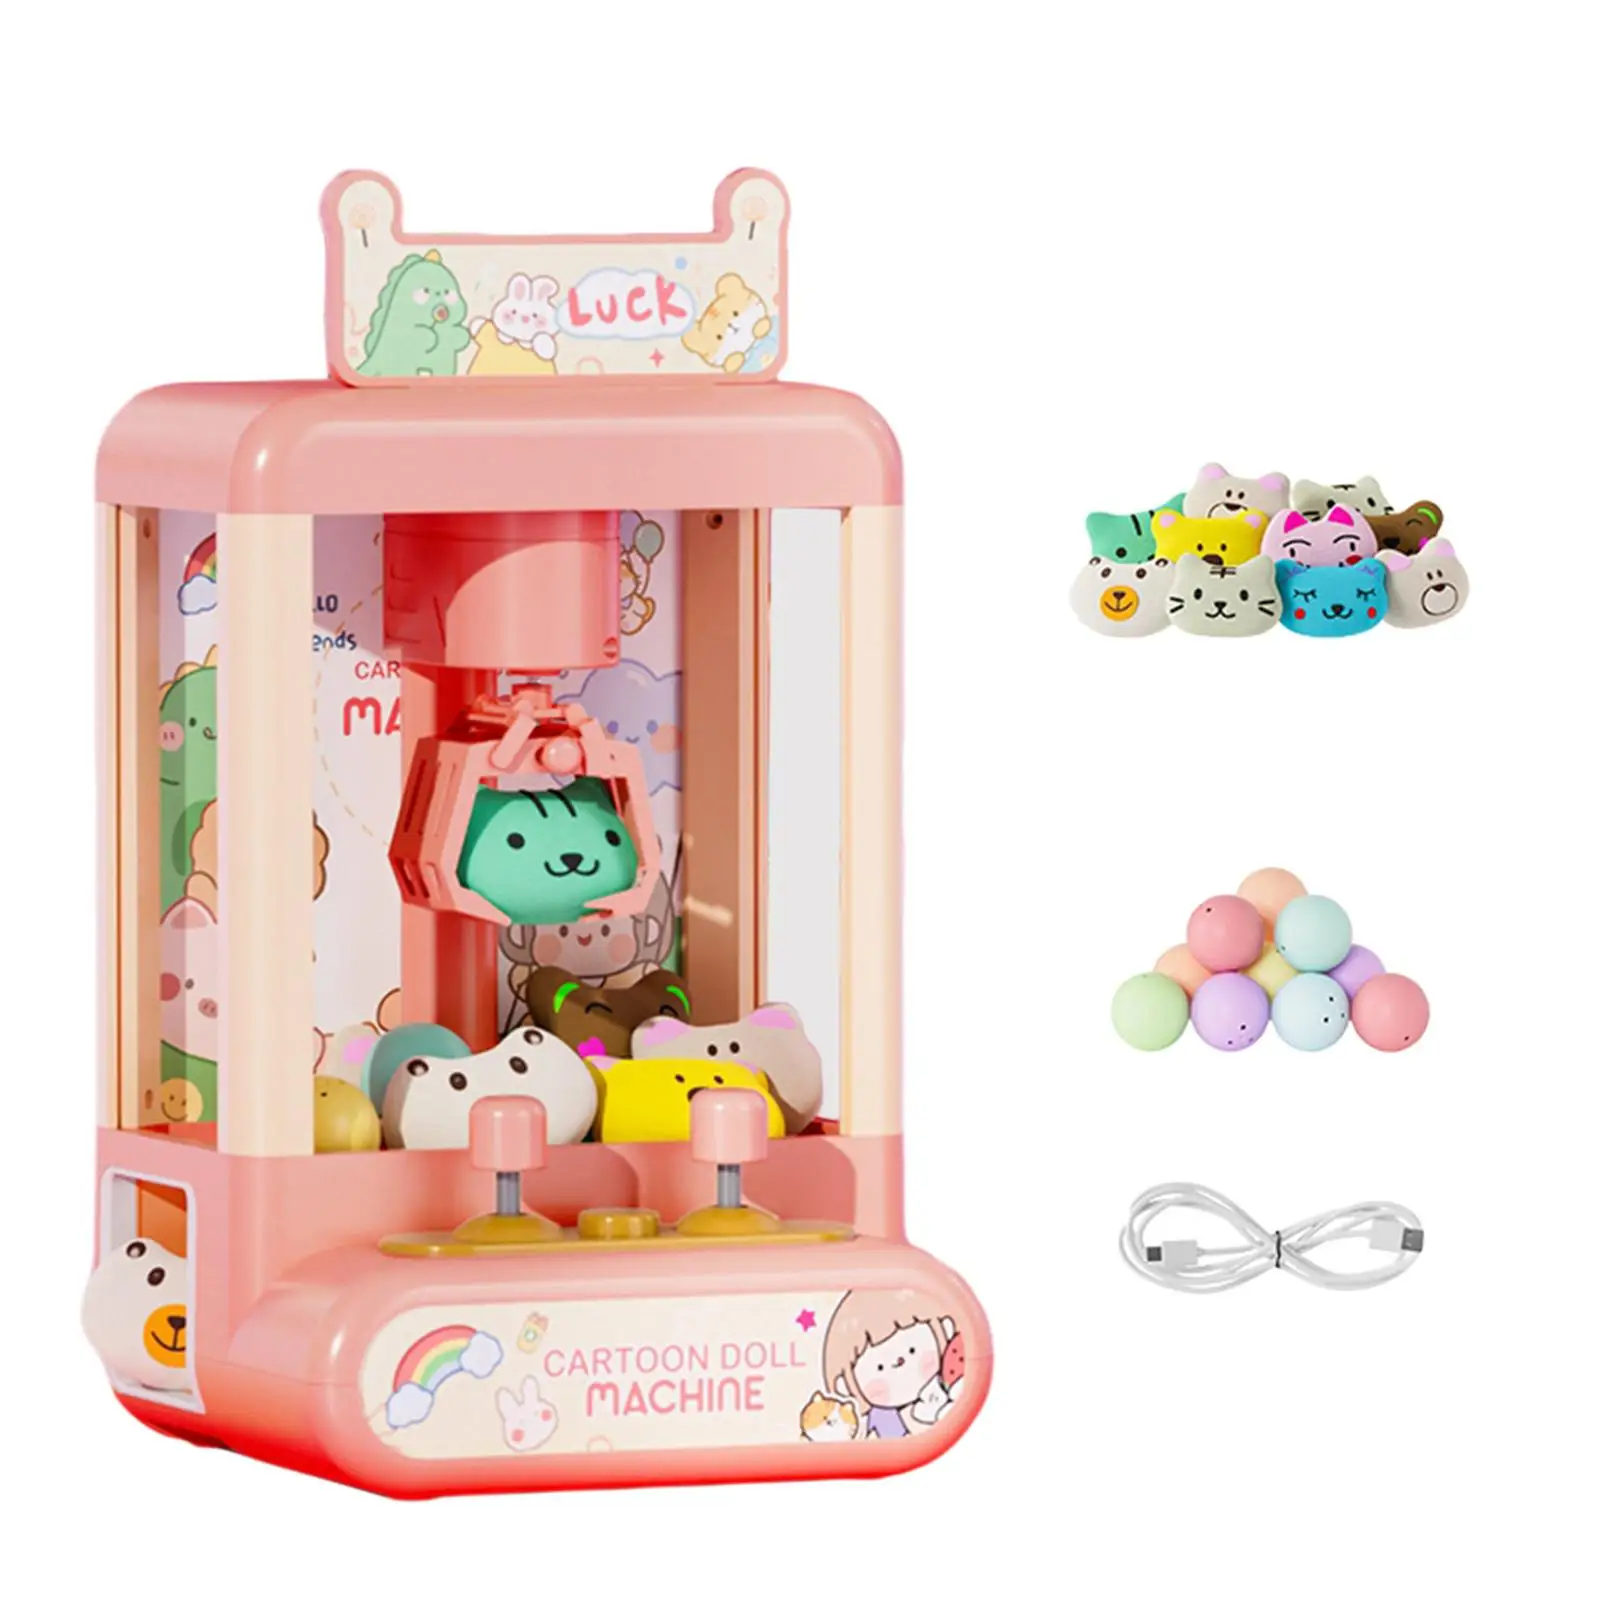 Claw Machine for Kids Mini Candy Vending Machine Arcade Games Candy Capsule Claw Game for Girls Boys Children Kids Christmas